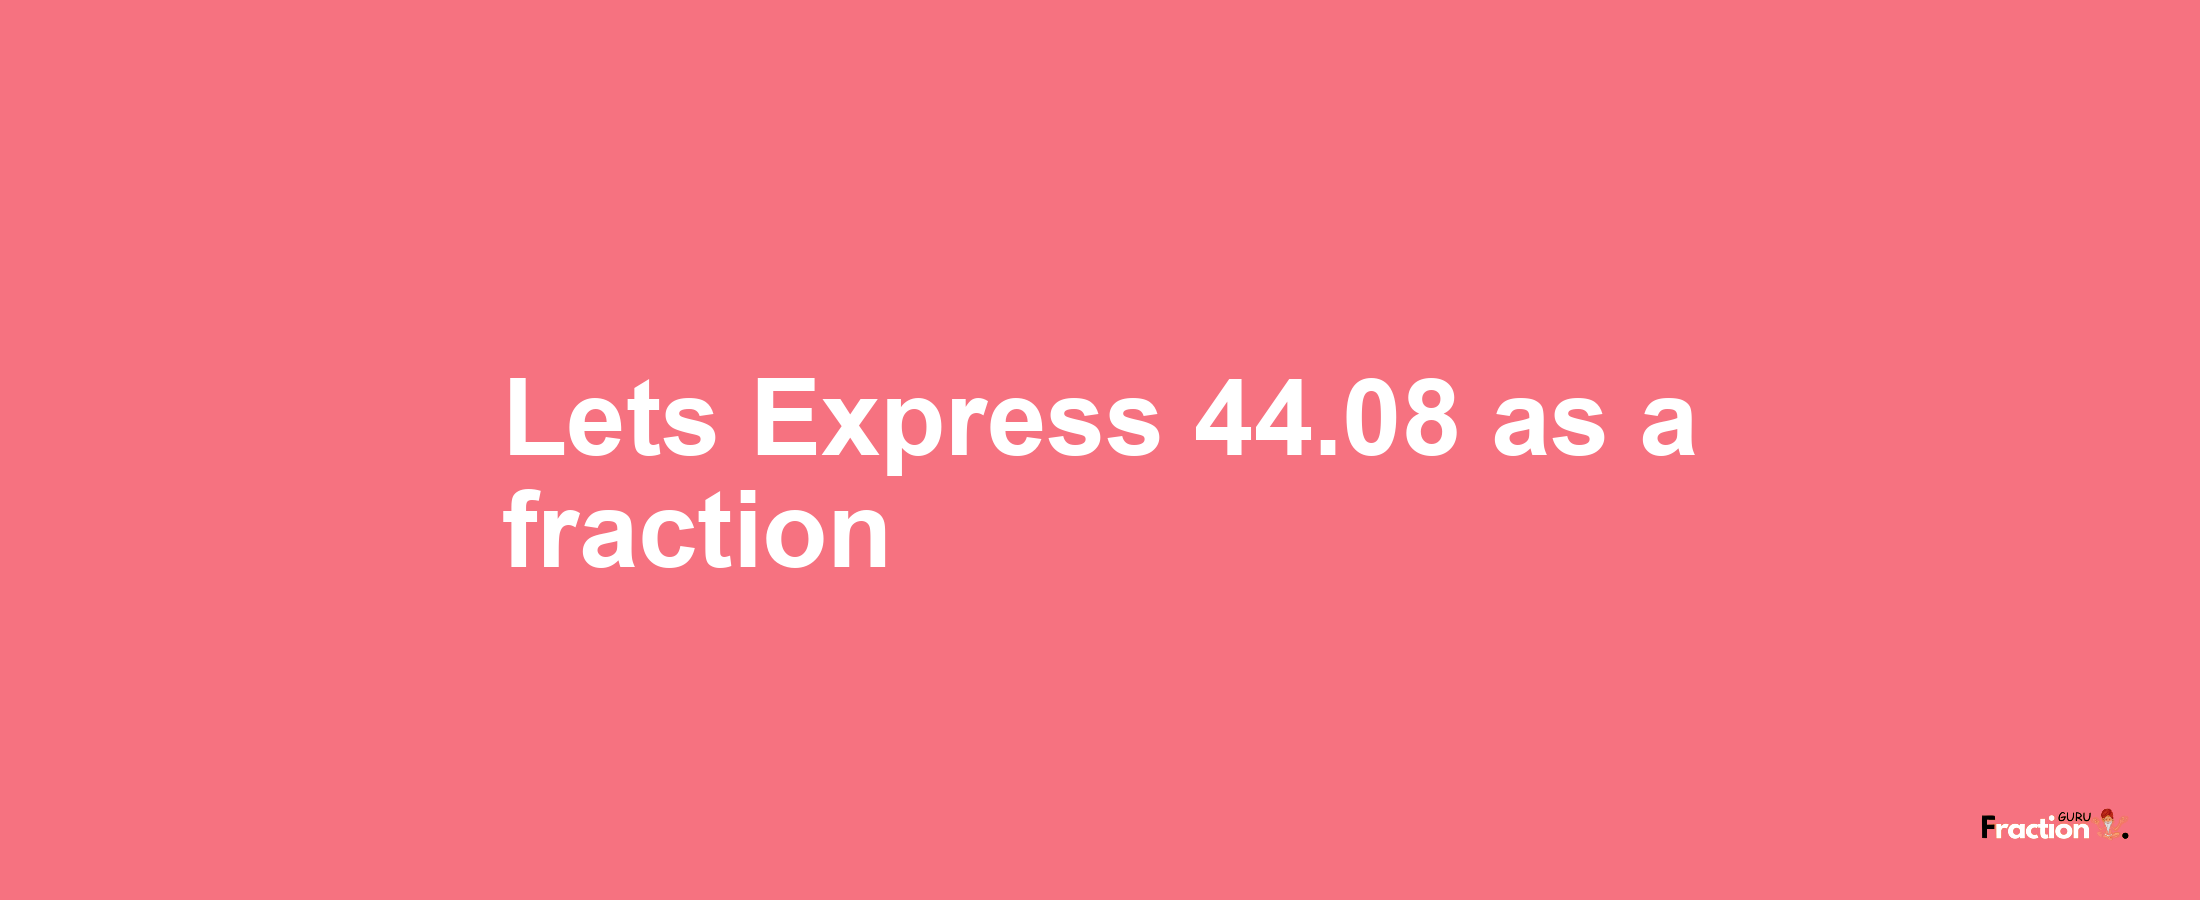 Lets Express 44.08 as afraction